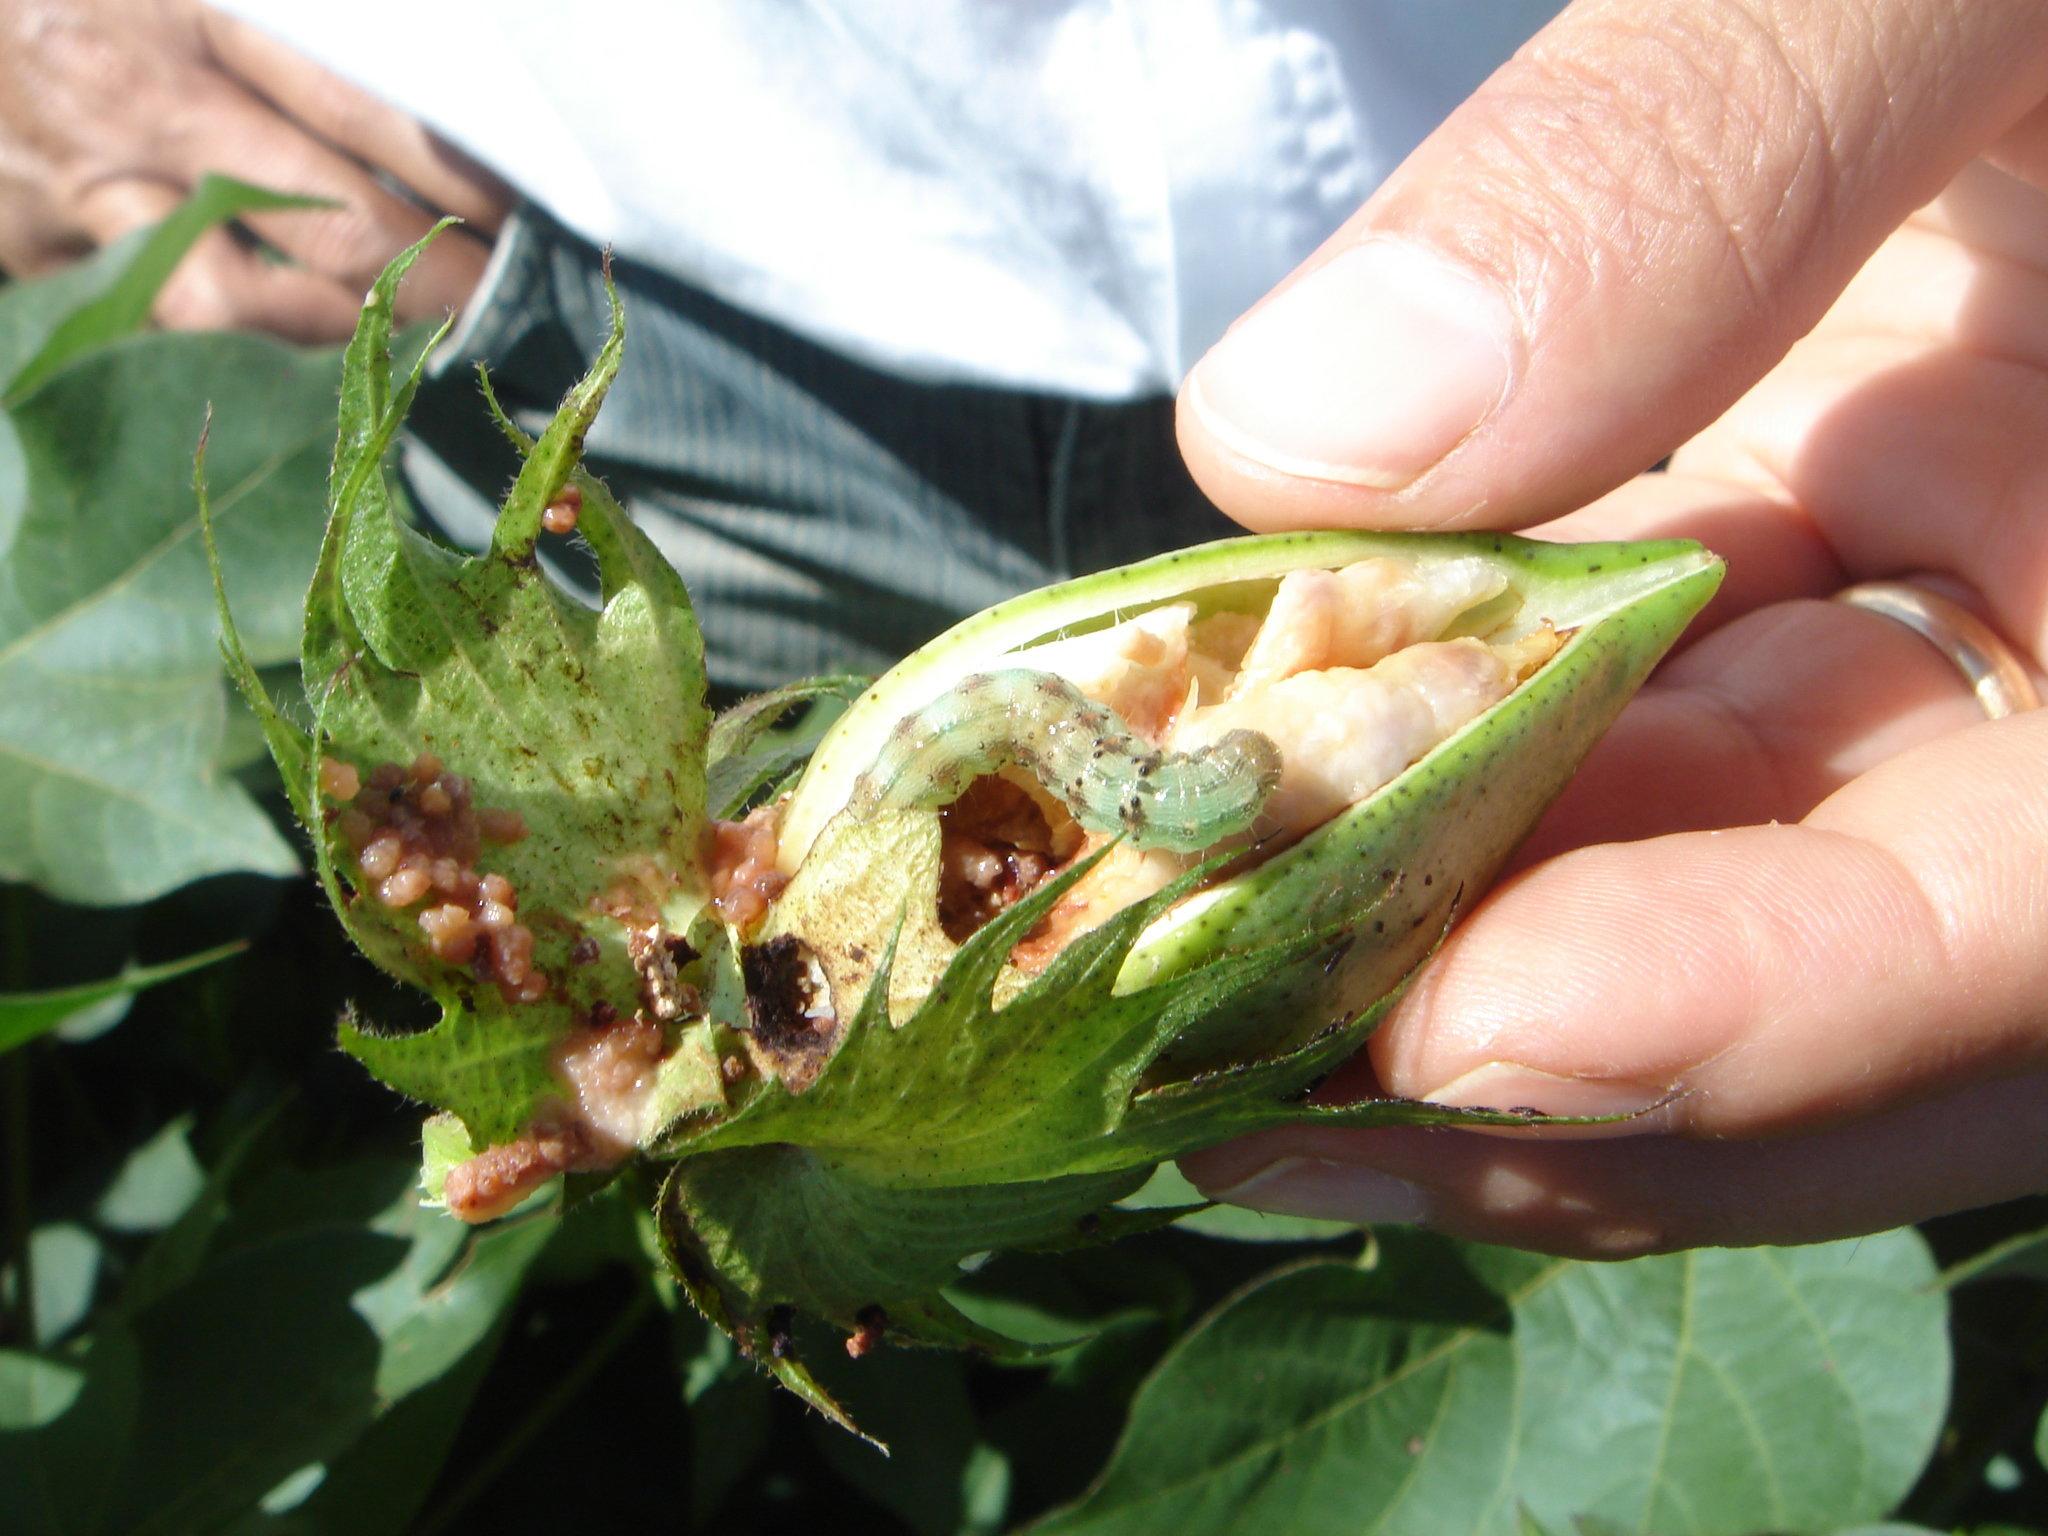 Hybrids of two major pest species, cotton bollworms and corn earworms, could be a major threat to global agriculture